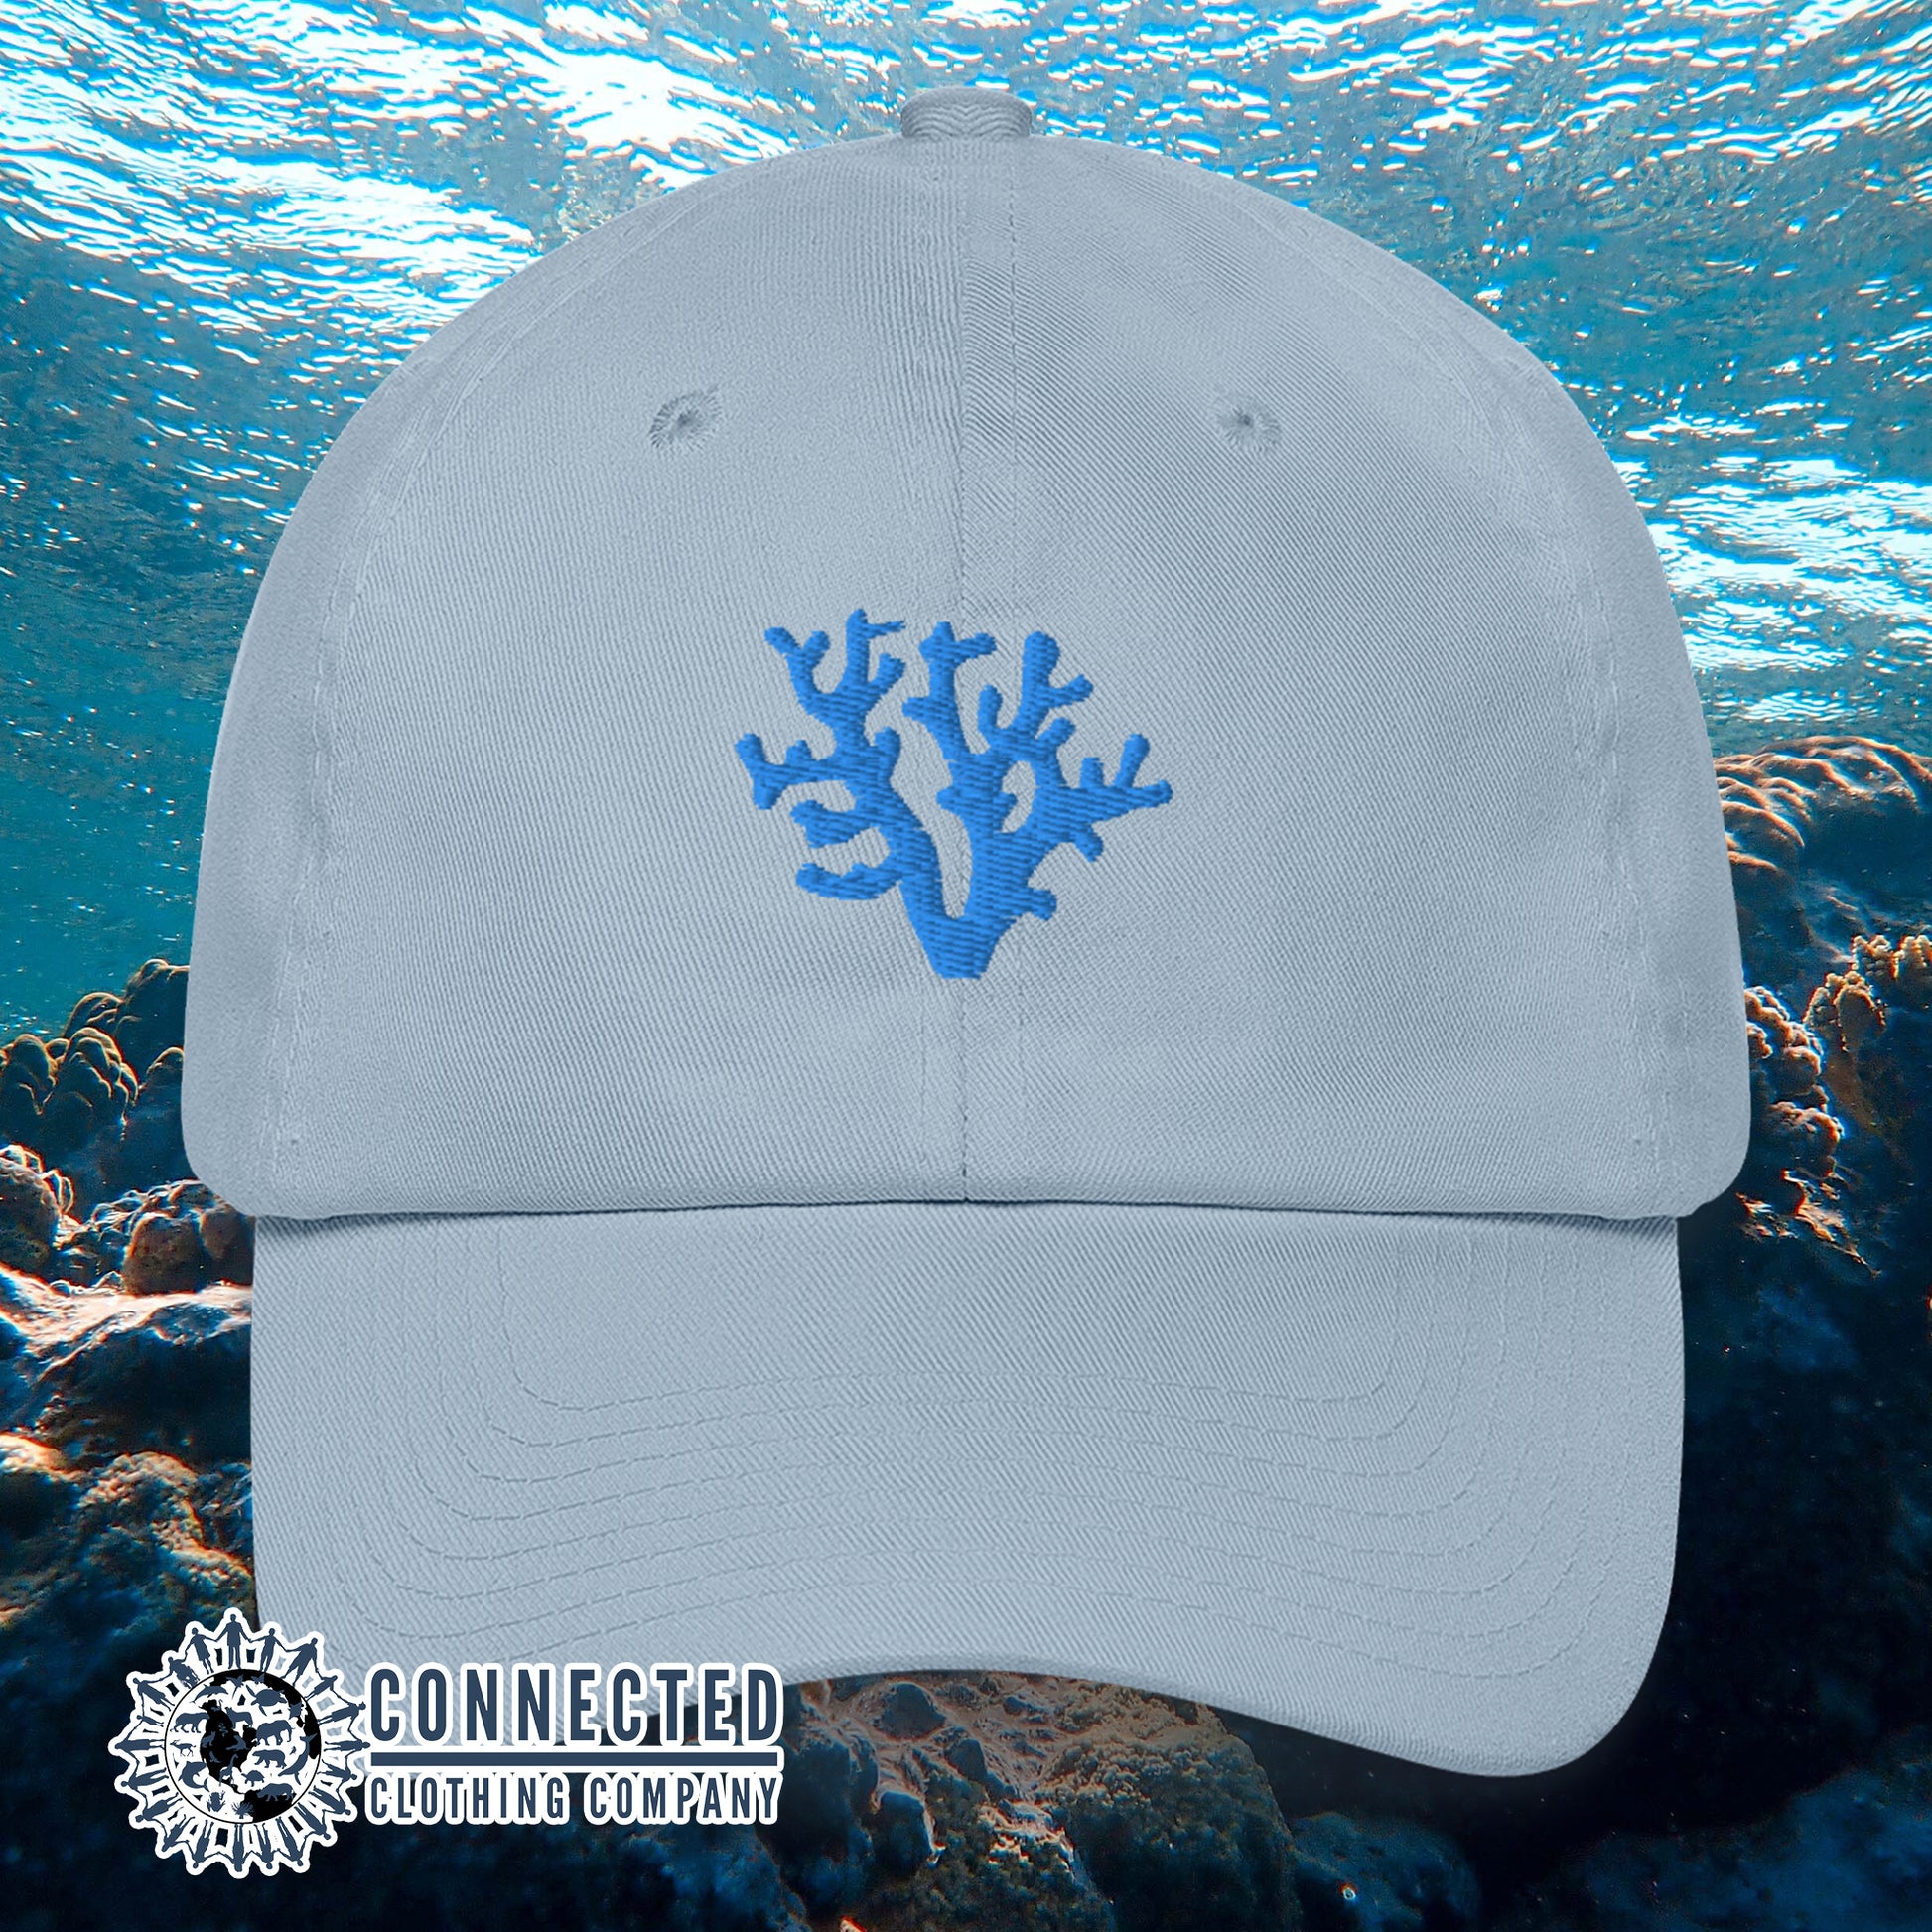 Blue Coral Cotton Cap - Connected Clothing Company - Ethically and Sustainably Made - 10% donated to Mission Blue ocean conservation